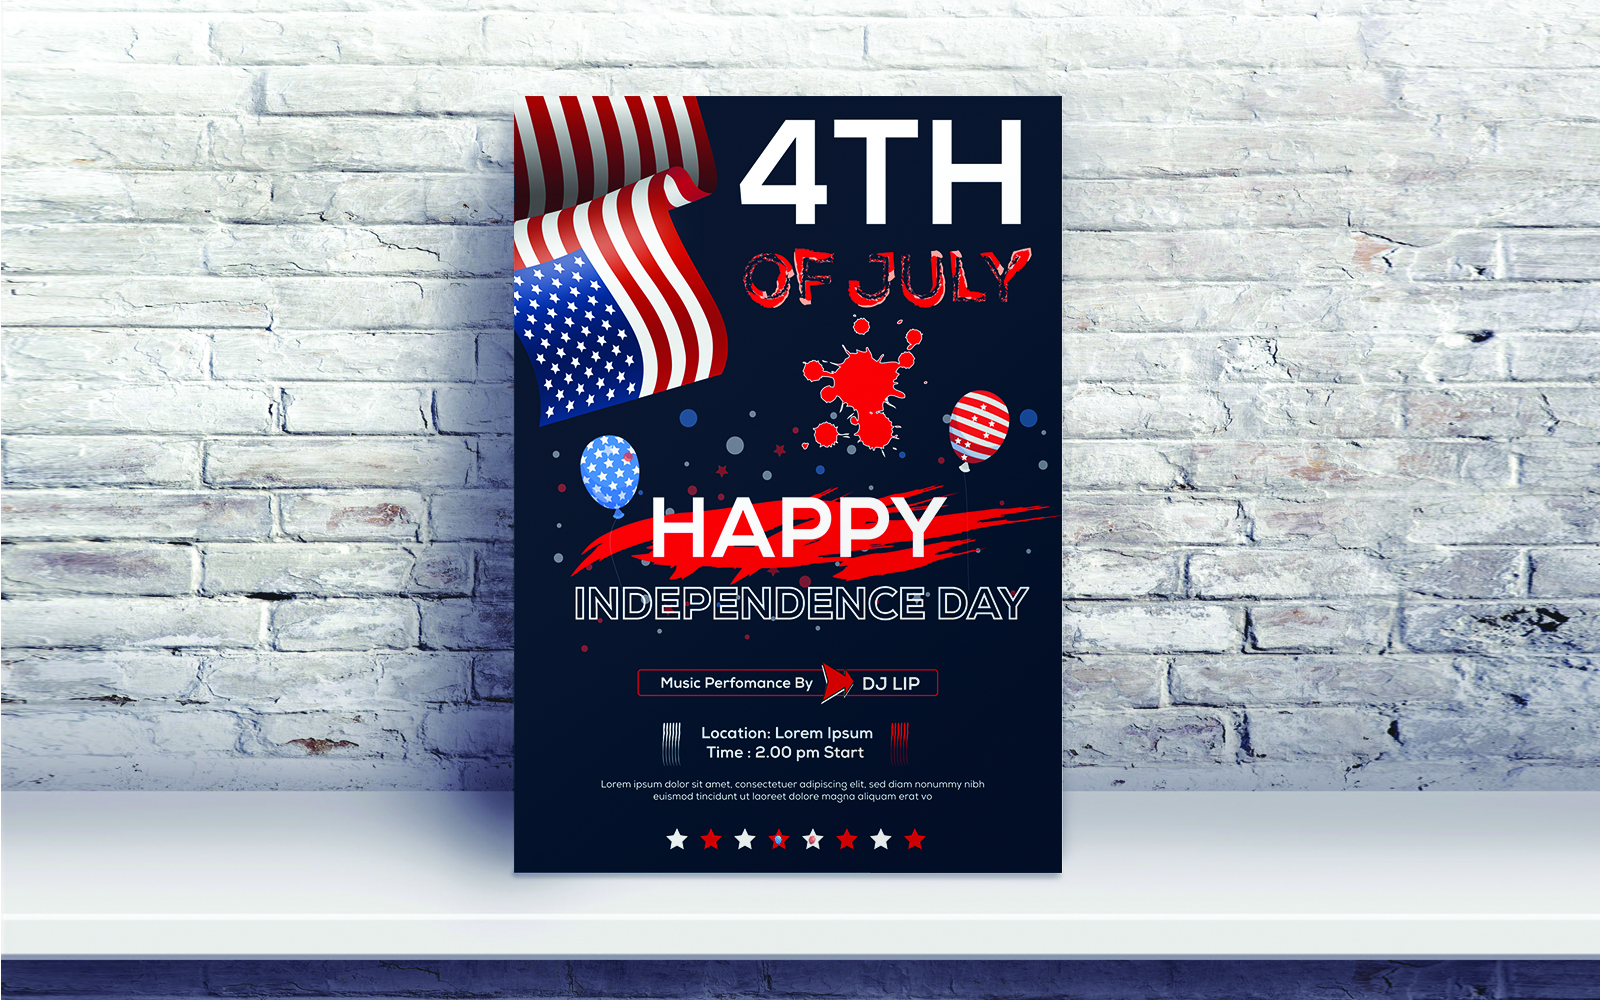 4th of July independence day Celebration - Corporate Identity Template